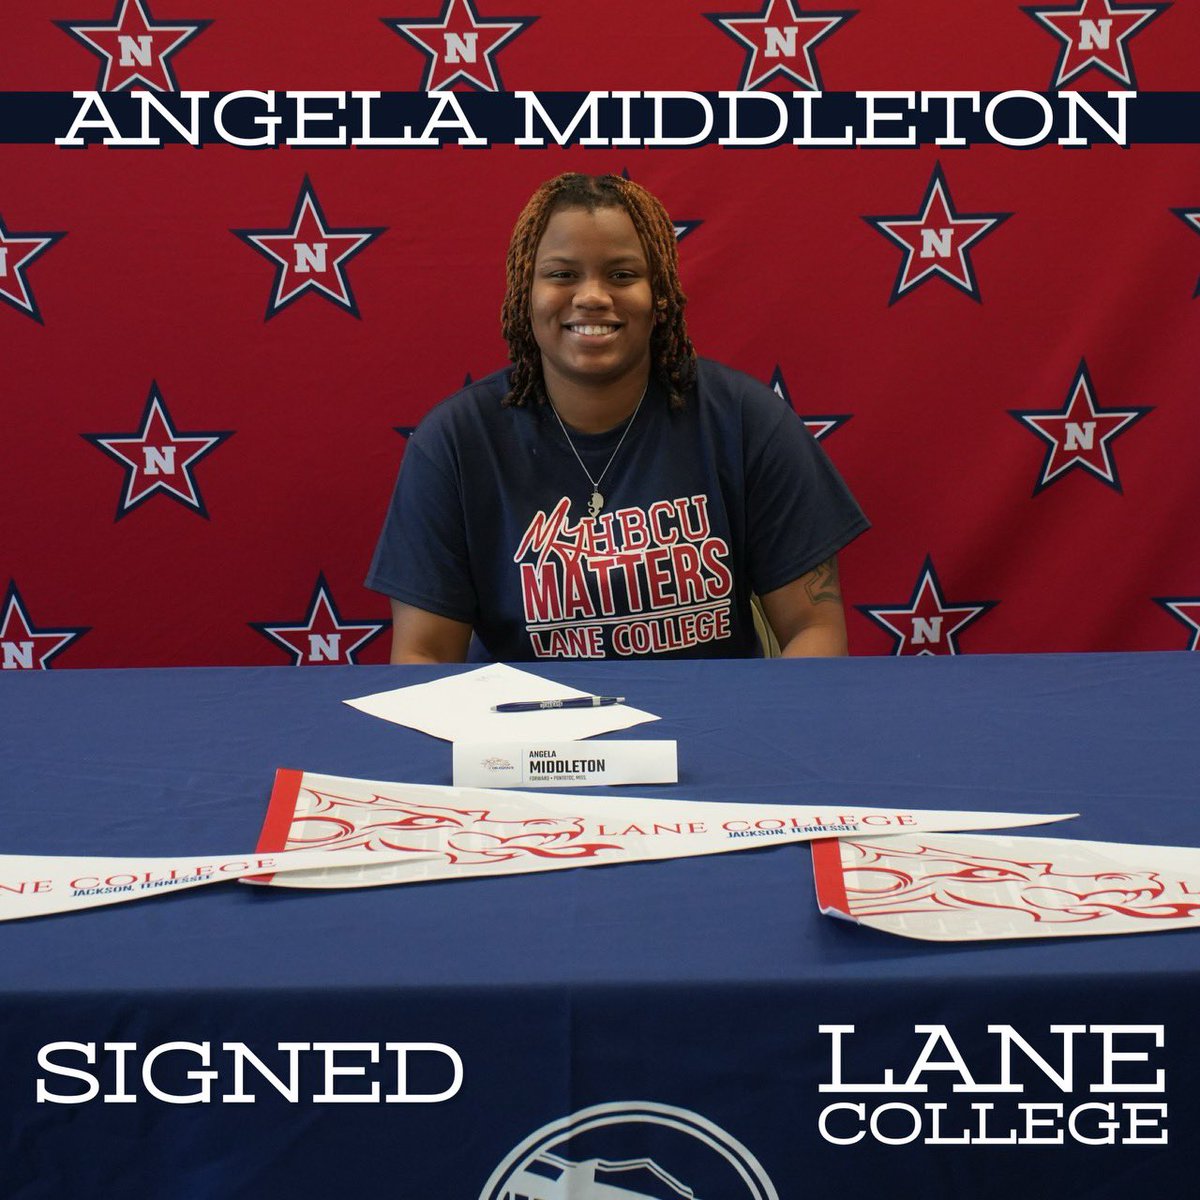 Angela Middleton (SF) GPA 3.5 from East Central Community College (MS) signed with Lane College basketball